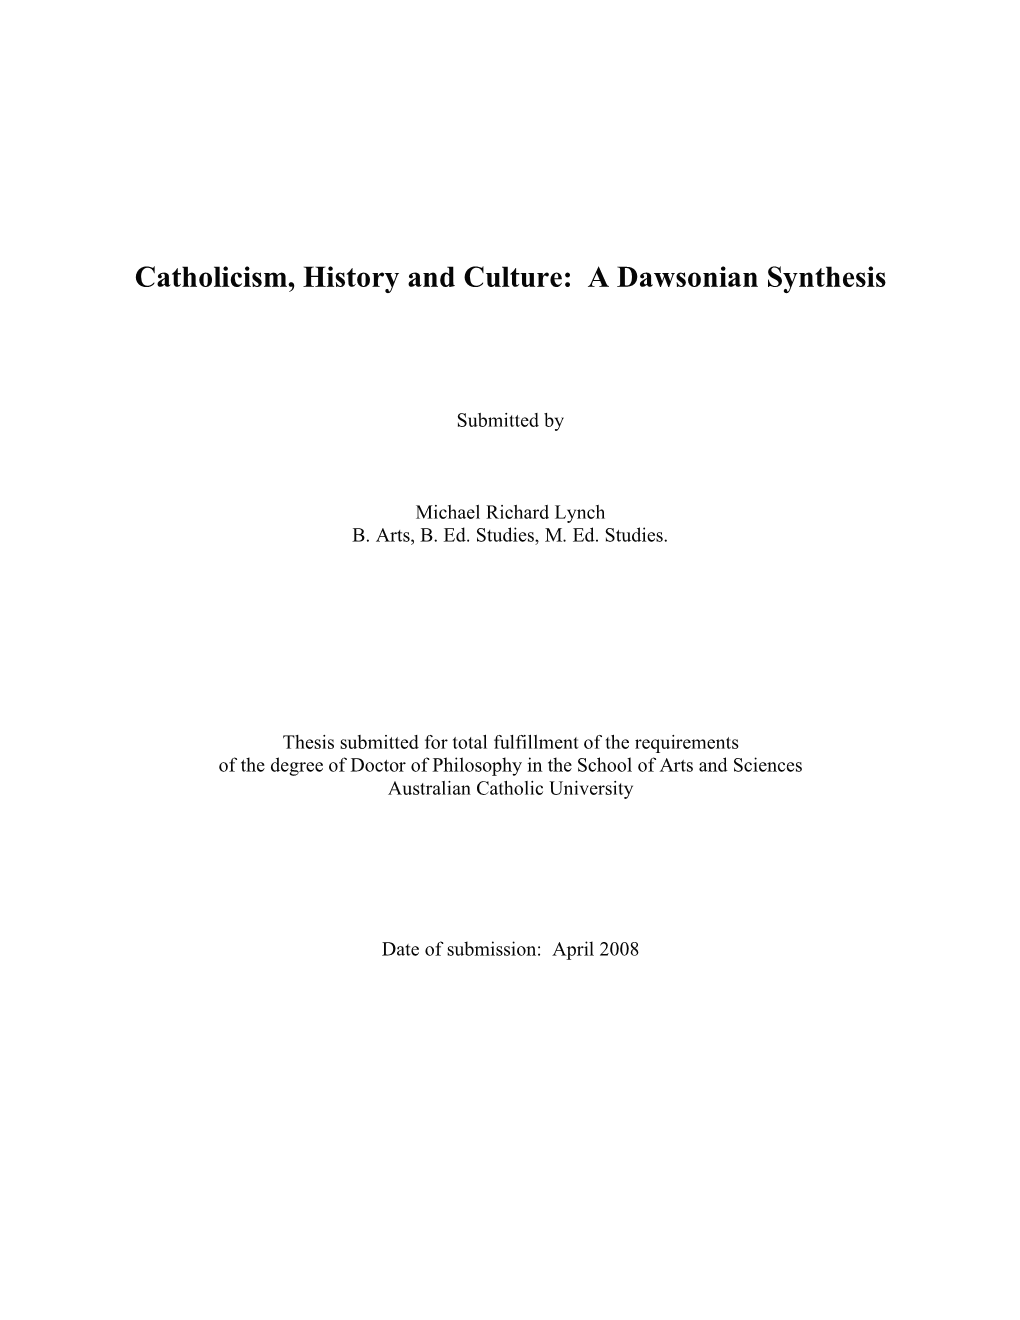 Catholicism, History and Culture: a Dawsonian Synthesis